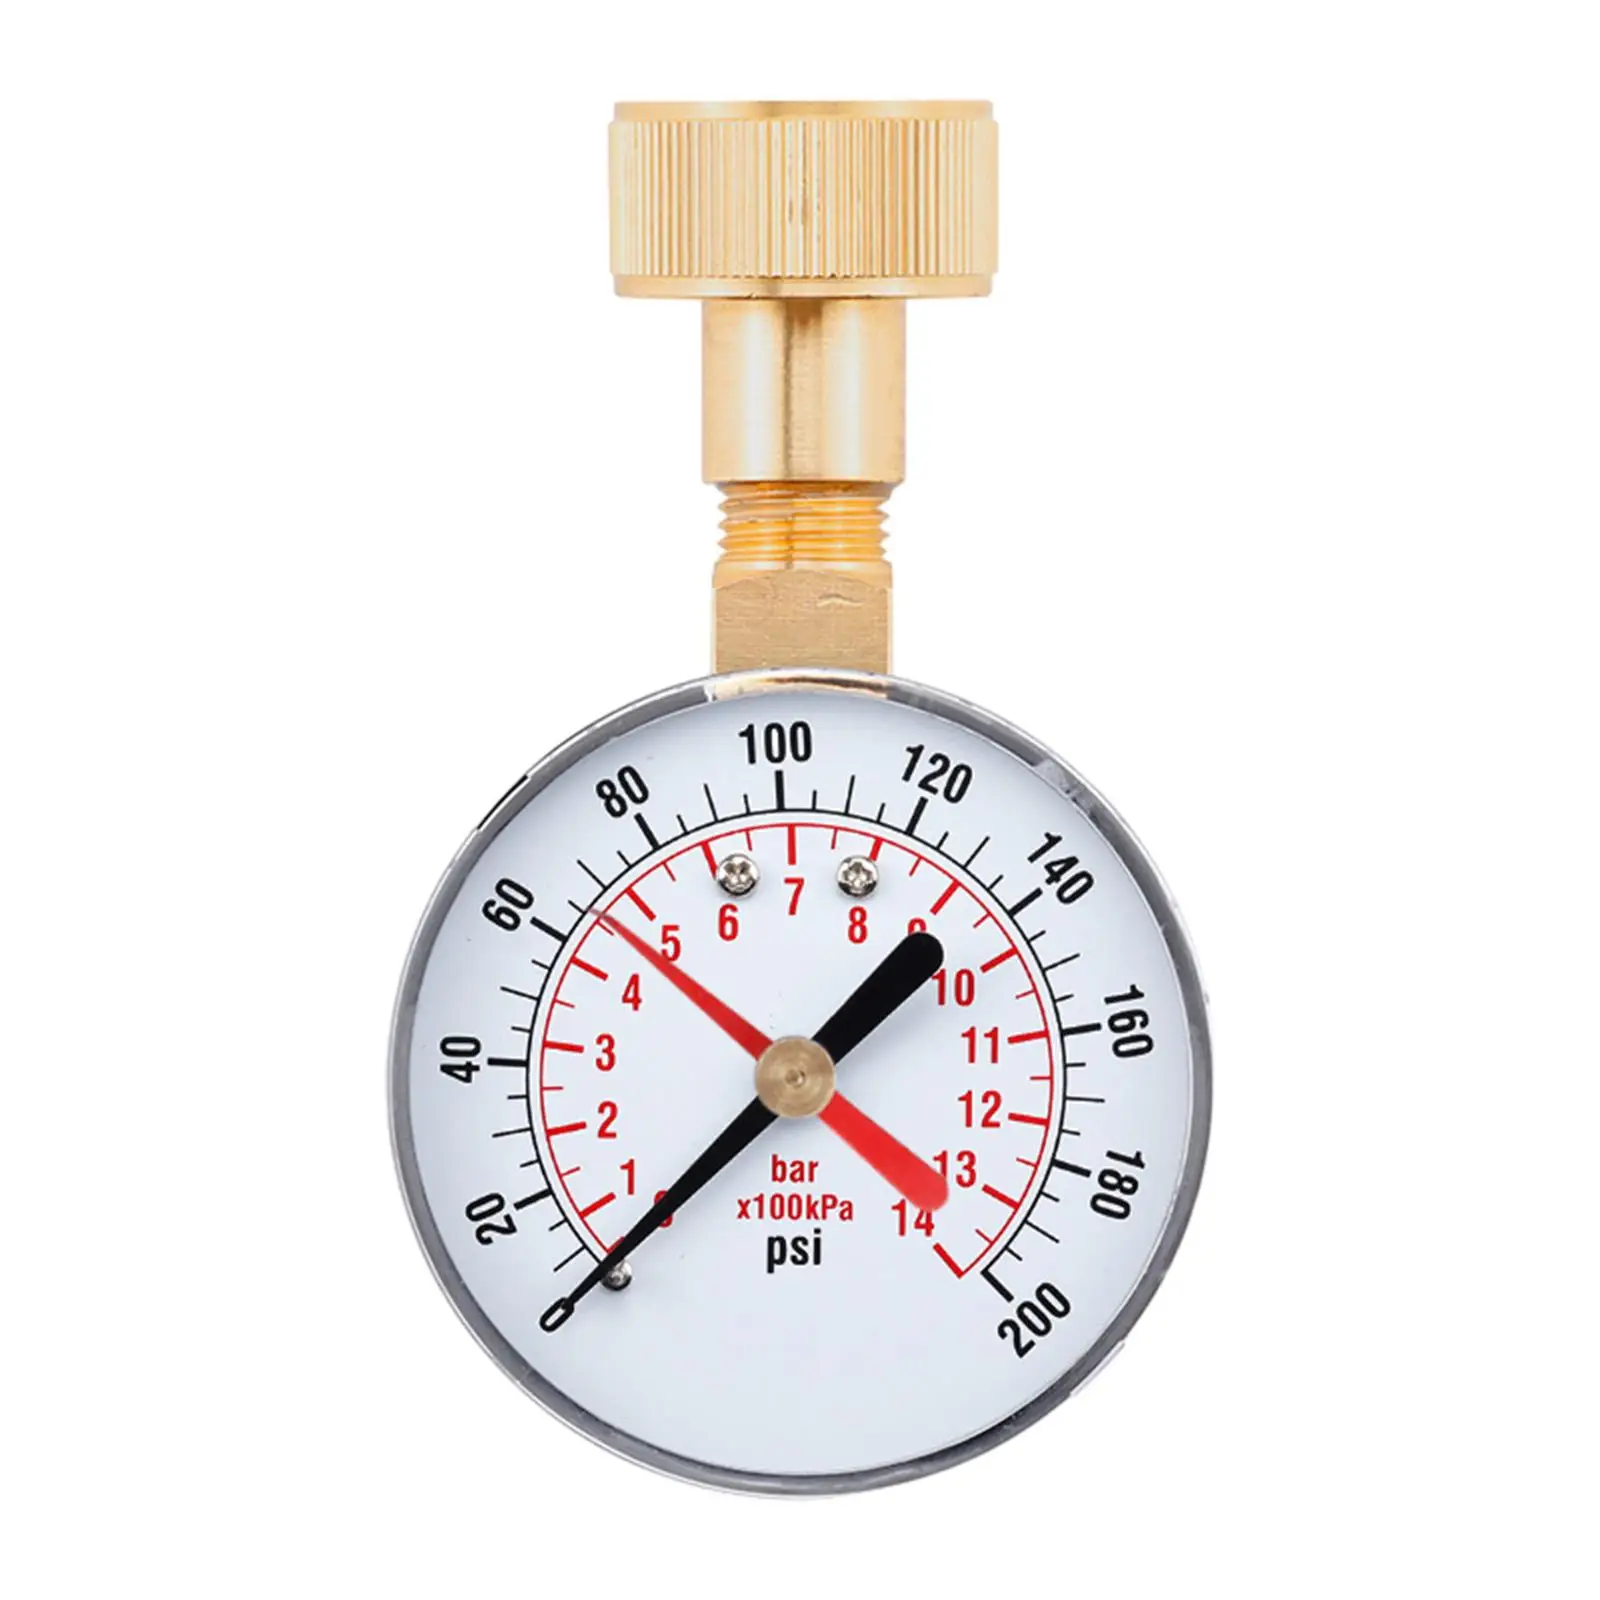 Pressure Gauge Durable Female Hose Thread Easy to Read Industrial with Red Pointer Metal Case Reliable Gas Fuel Water Test Gauge